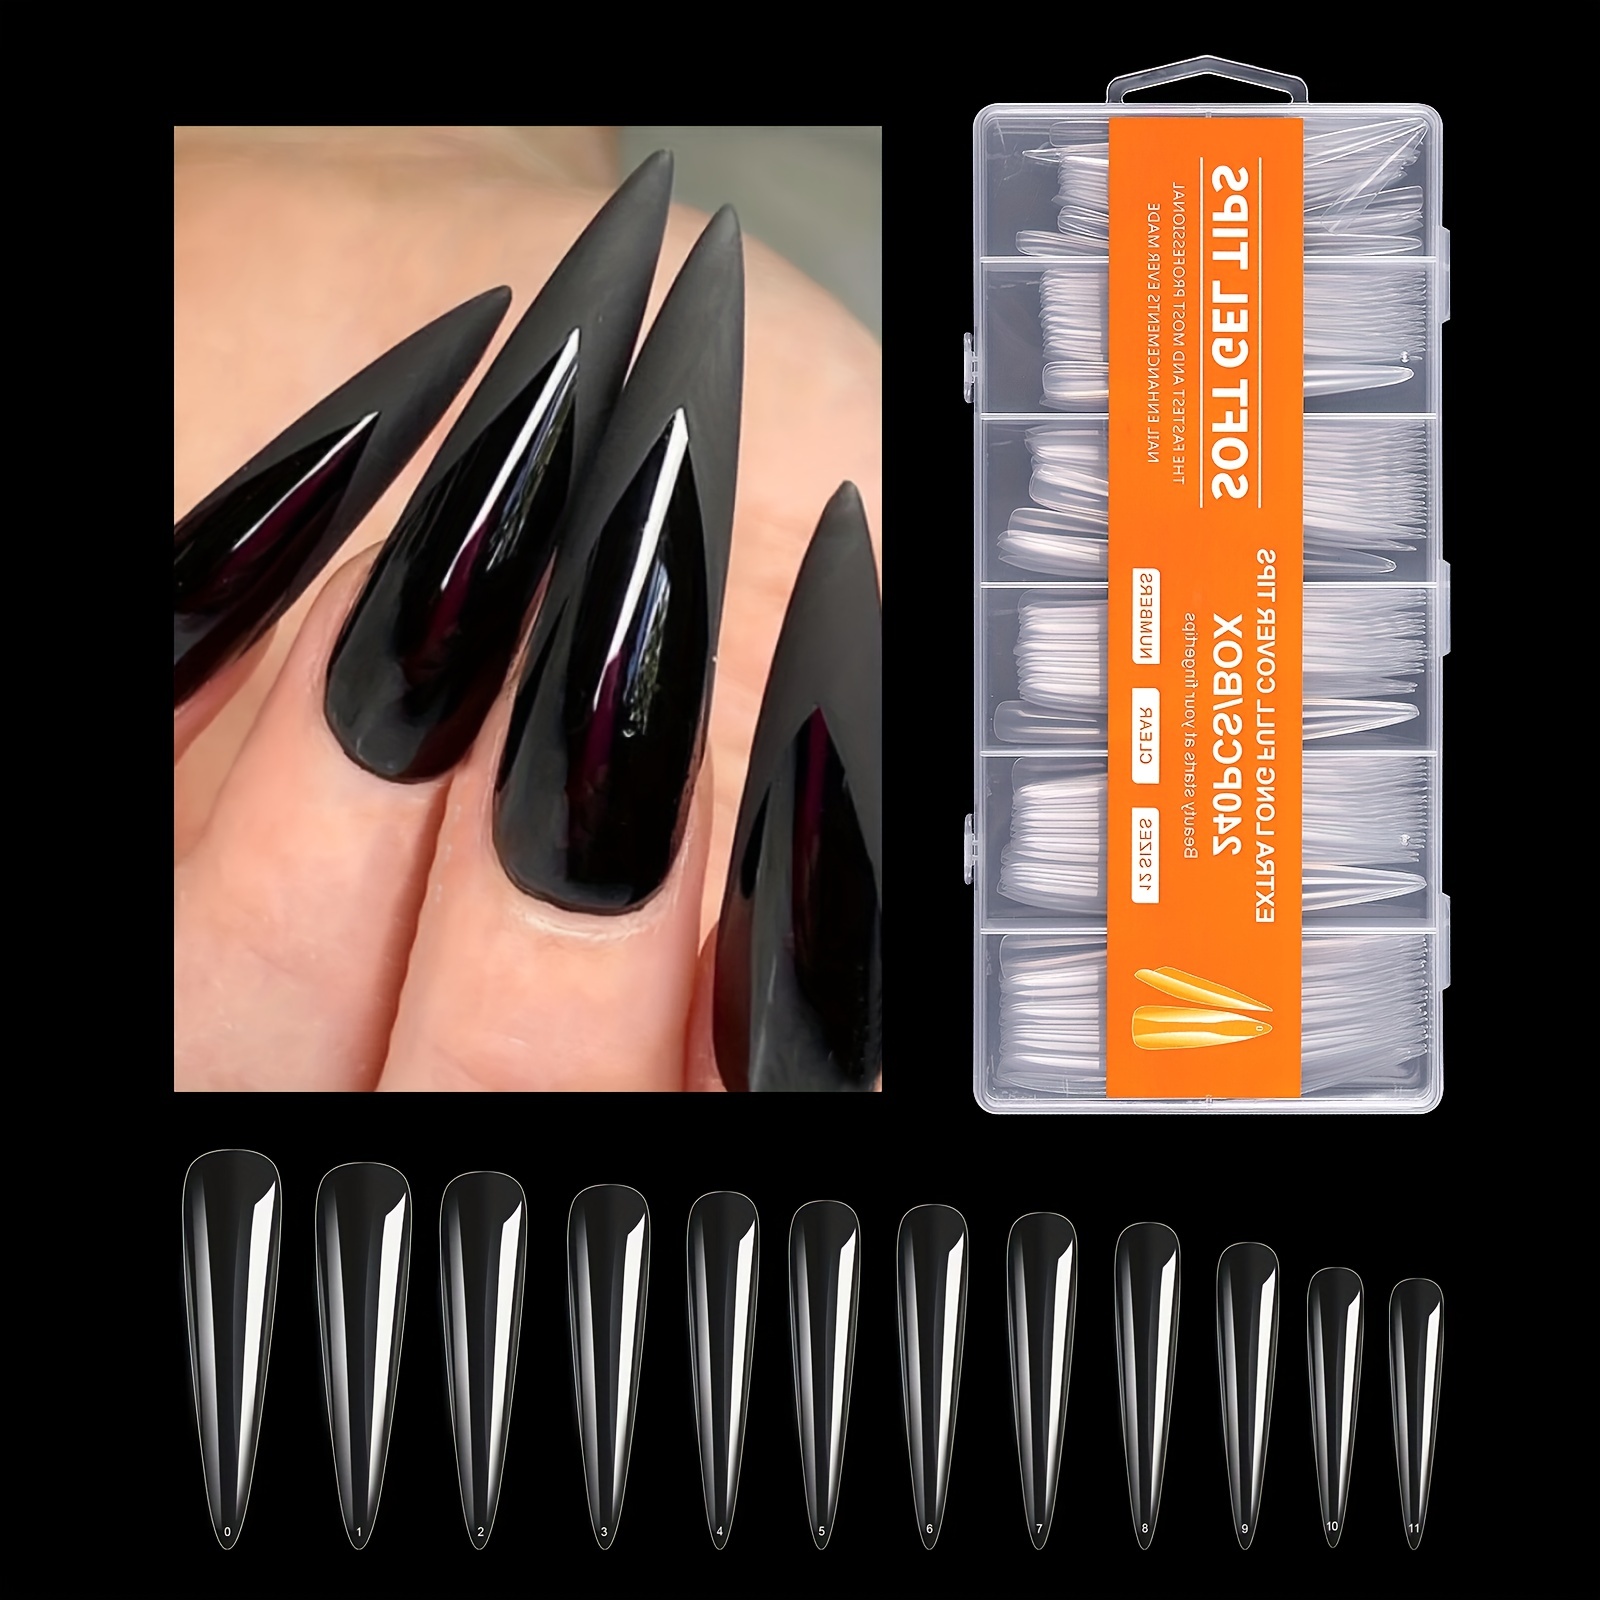 

240pcs Super Long Pointed Coffin Fake Gel Nail Tips Set, 12 Sizes Full Cover Acrylic Press On Nails Clear Artificial False Nails Kit, French Nail Tips For Diy Nails Salon